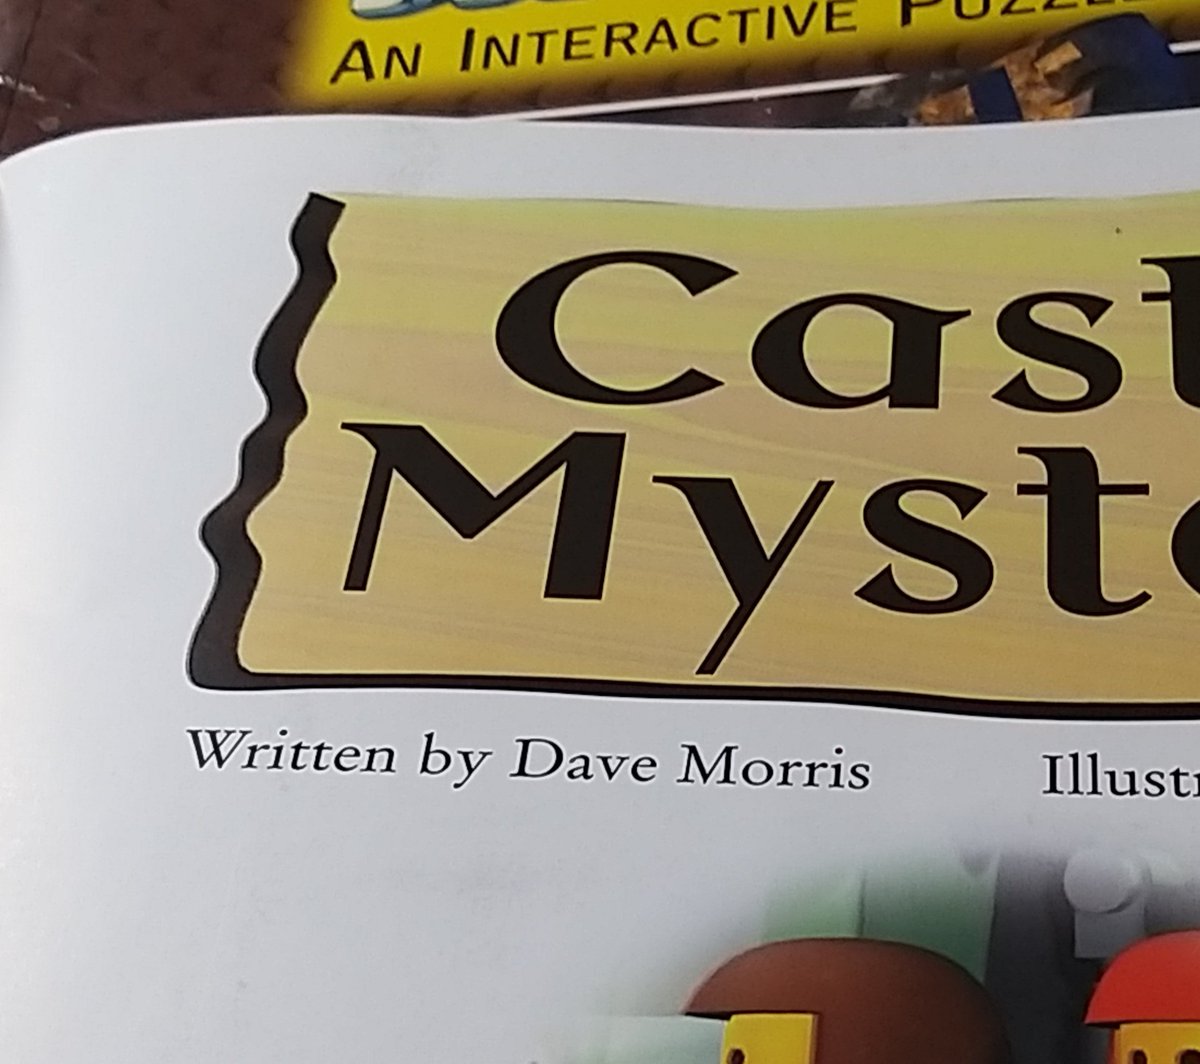 I was expecting some rather simplistic puzzles, and a few are but some really do require putting the old thinking cap on.

If you're wondering why this is in the gamebook selection, check the author's name.

#1amgamebooktime #legopuzzle #castlemystery #success